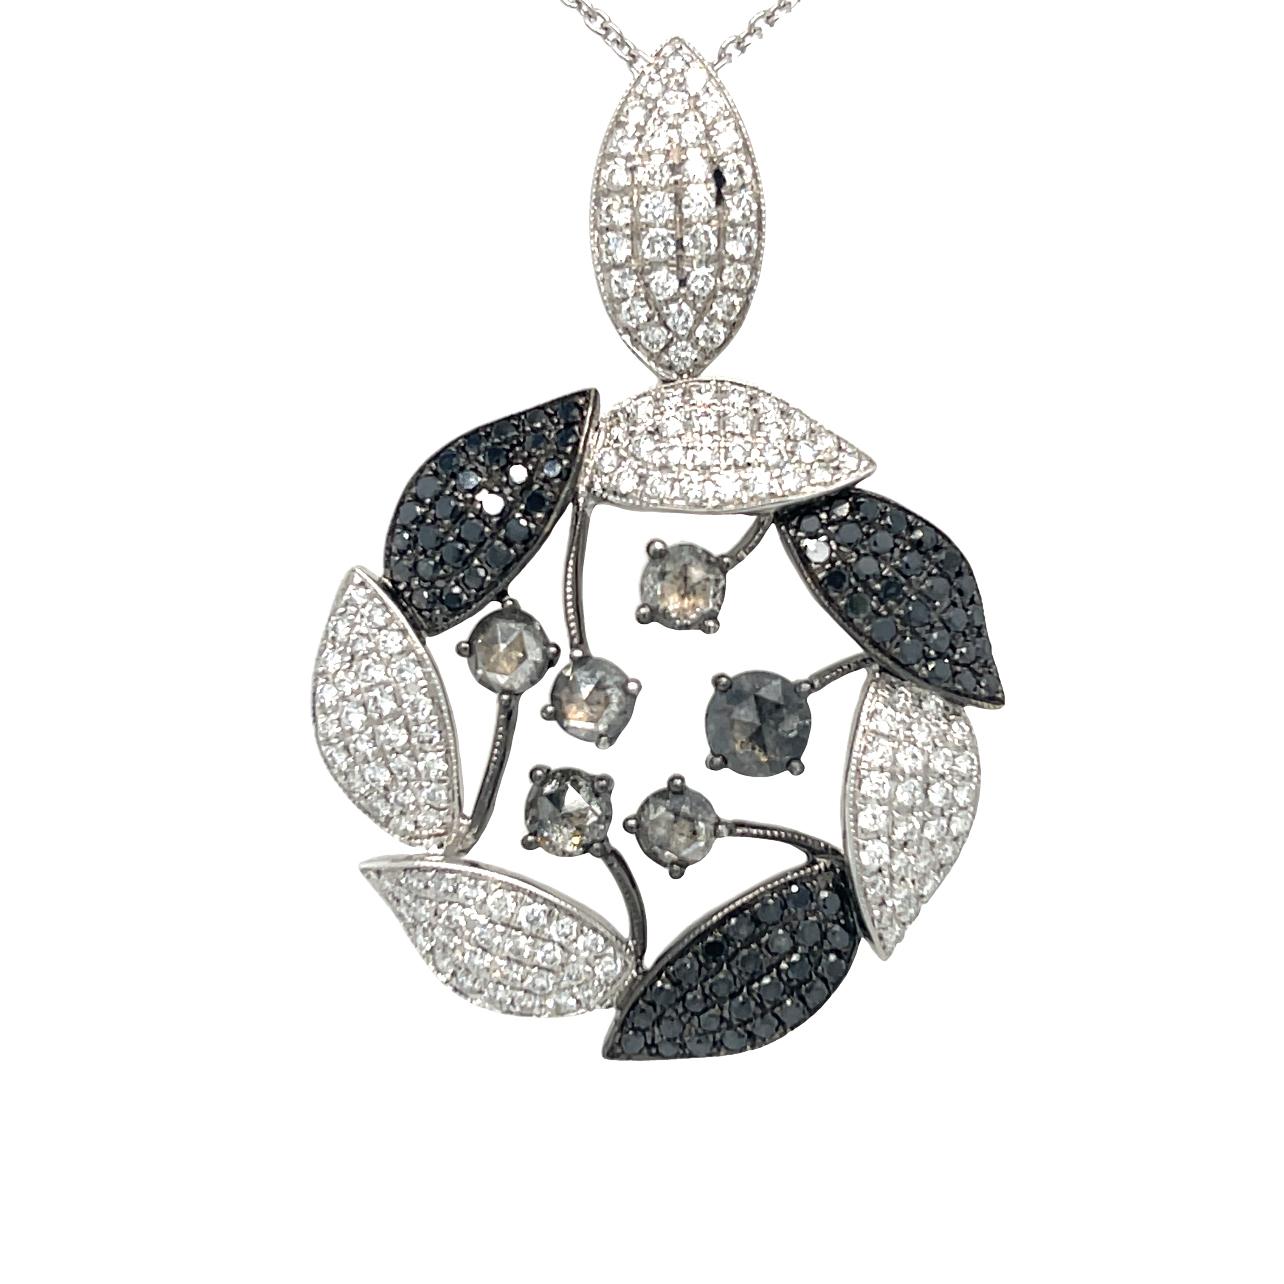 This elegant pendant has fancy colored diamonds set in 18K White Gold. The elegant leaves on this pendant are intertwined to form a beautiful circle with larger colored diamonds suspended in the center. White gold chain is included. Pendant has